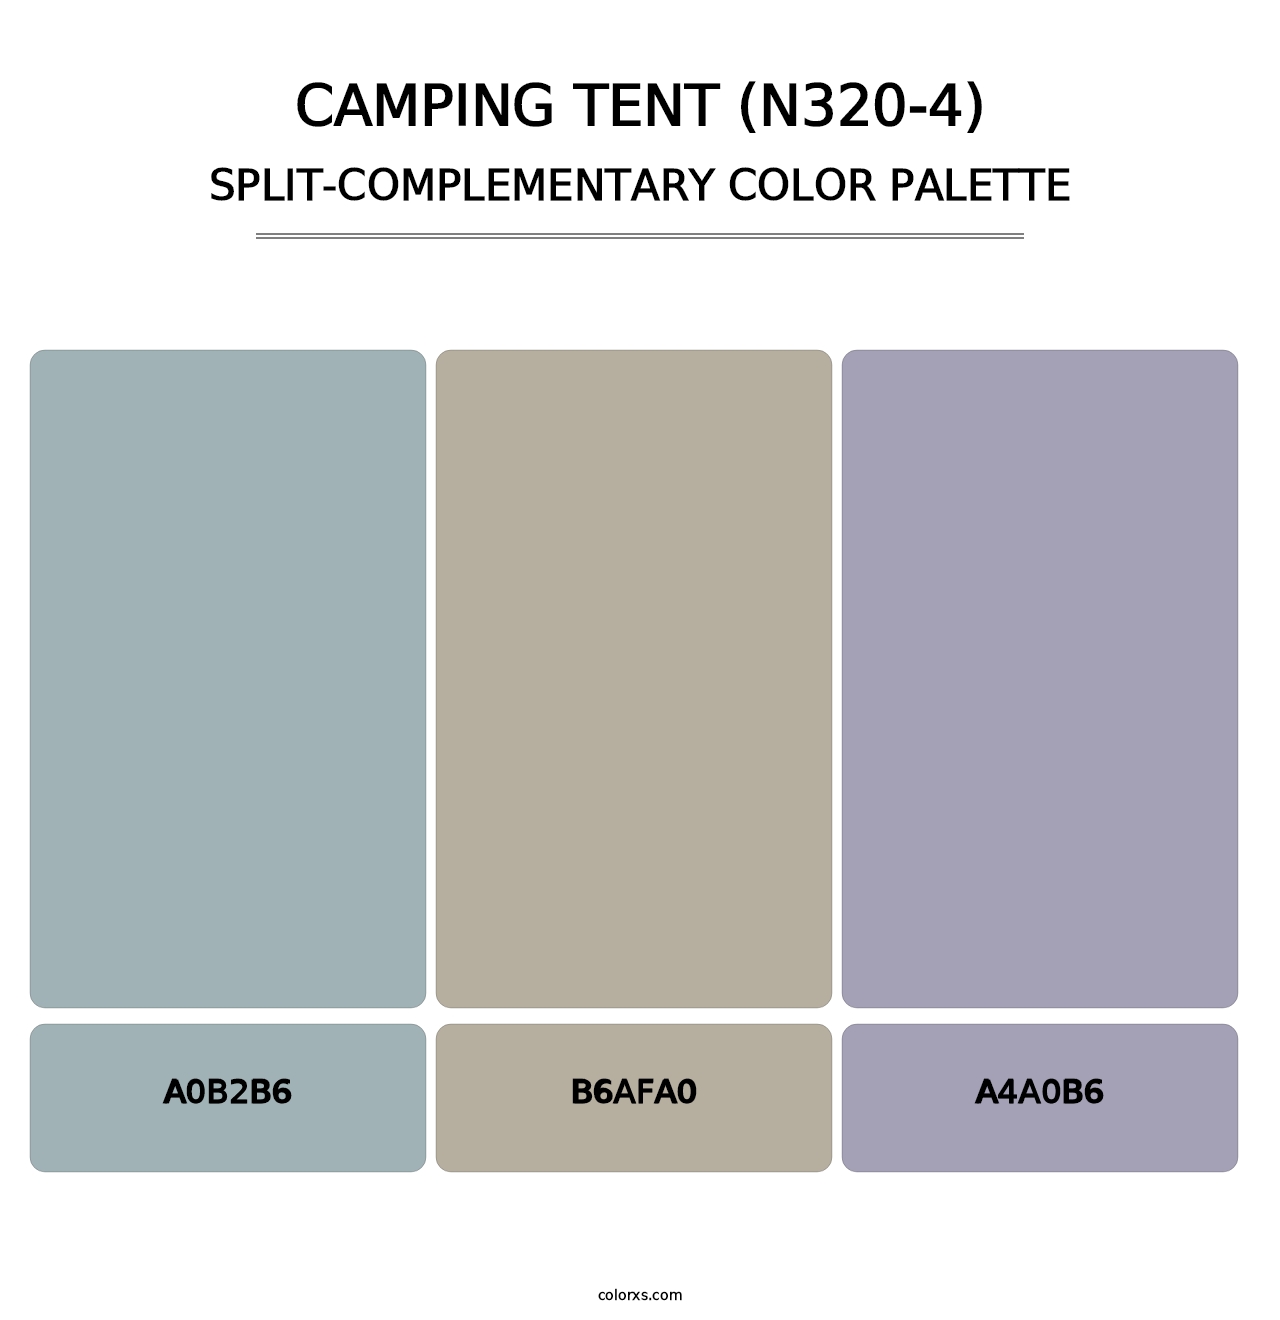 Camping Tent (N320-4) - Split-Complementary Color Palette